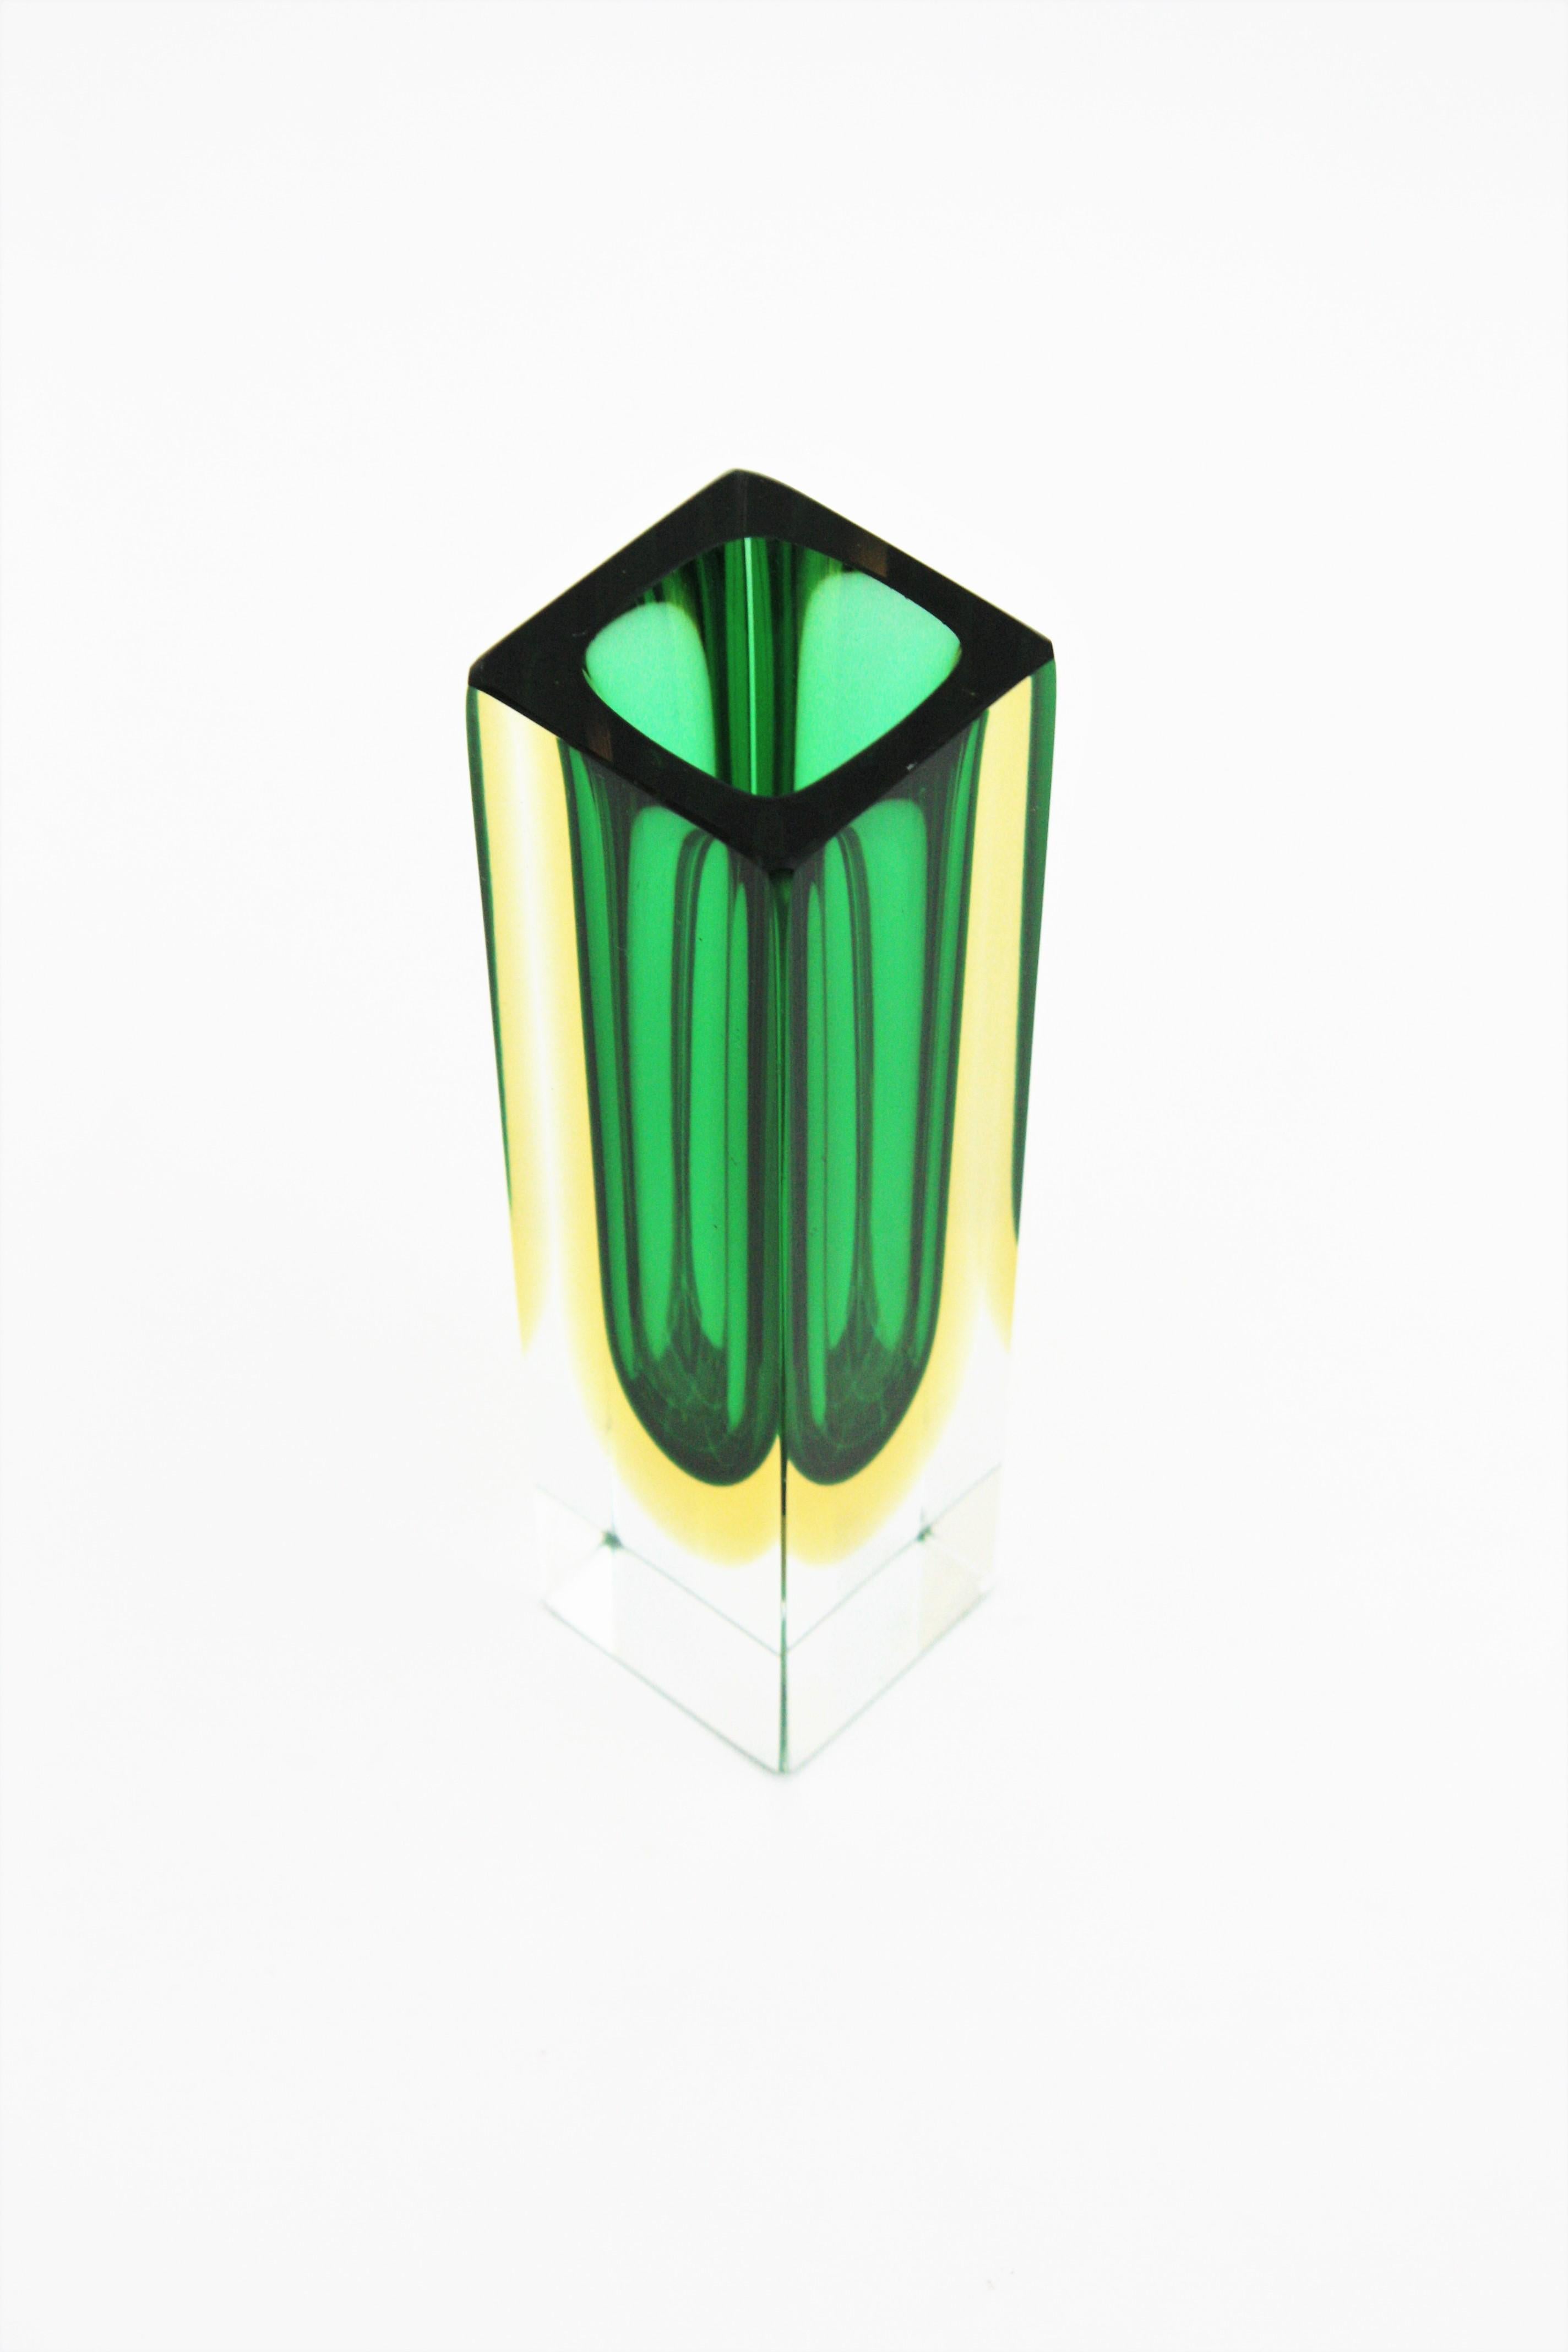 Murano Glass Flavio Poli Murano Faceted Sommerso Green Yellow and Clear Art Glass Vase For Sale